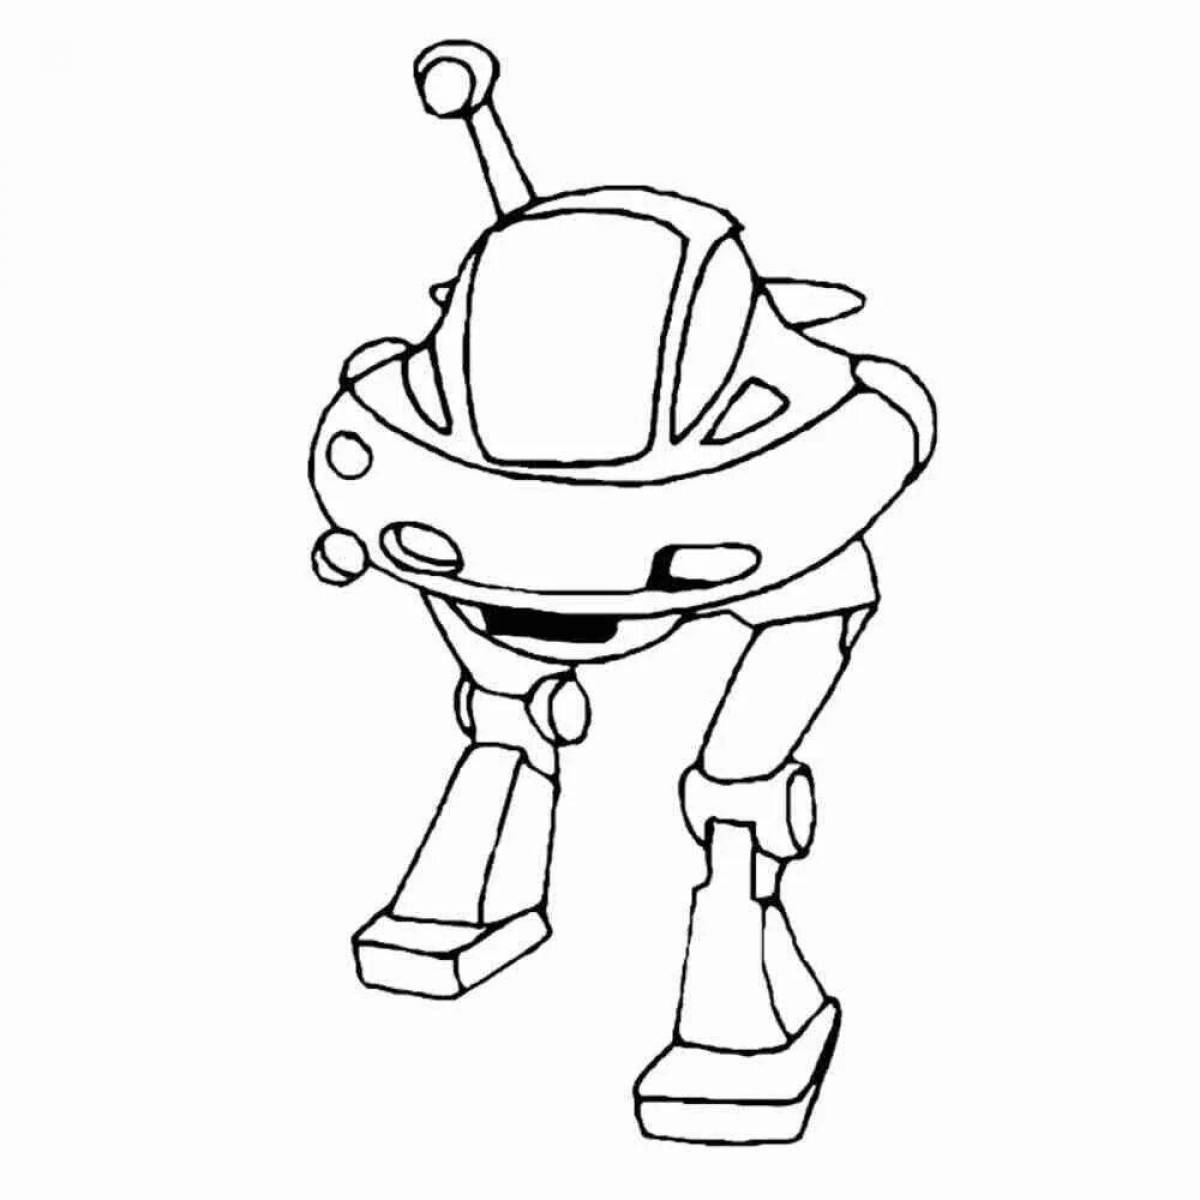 Coloring page energetic lunar rover